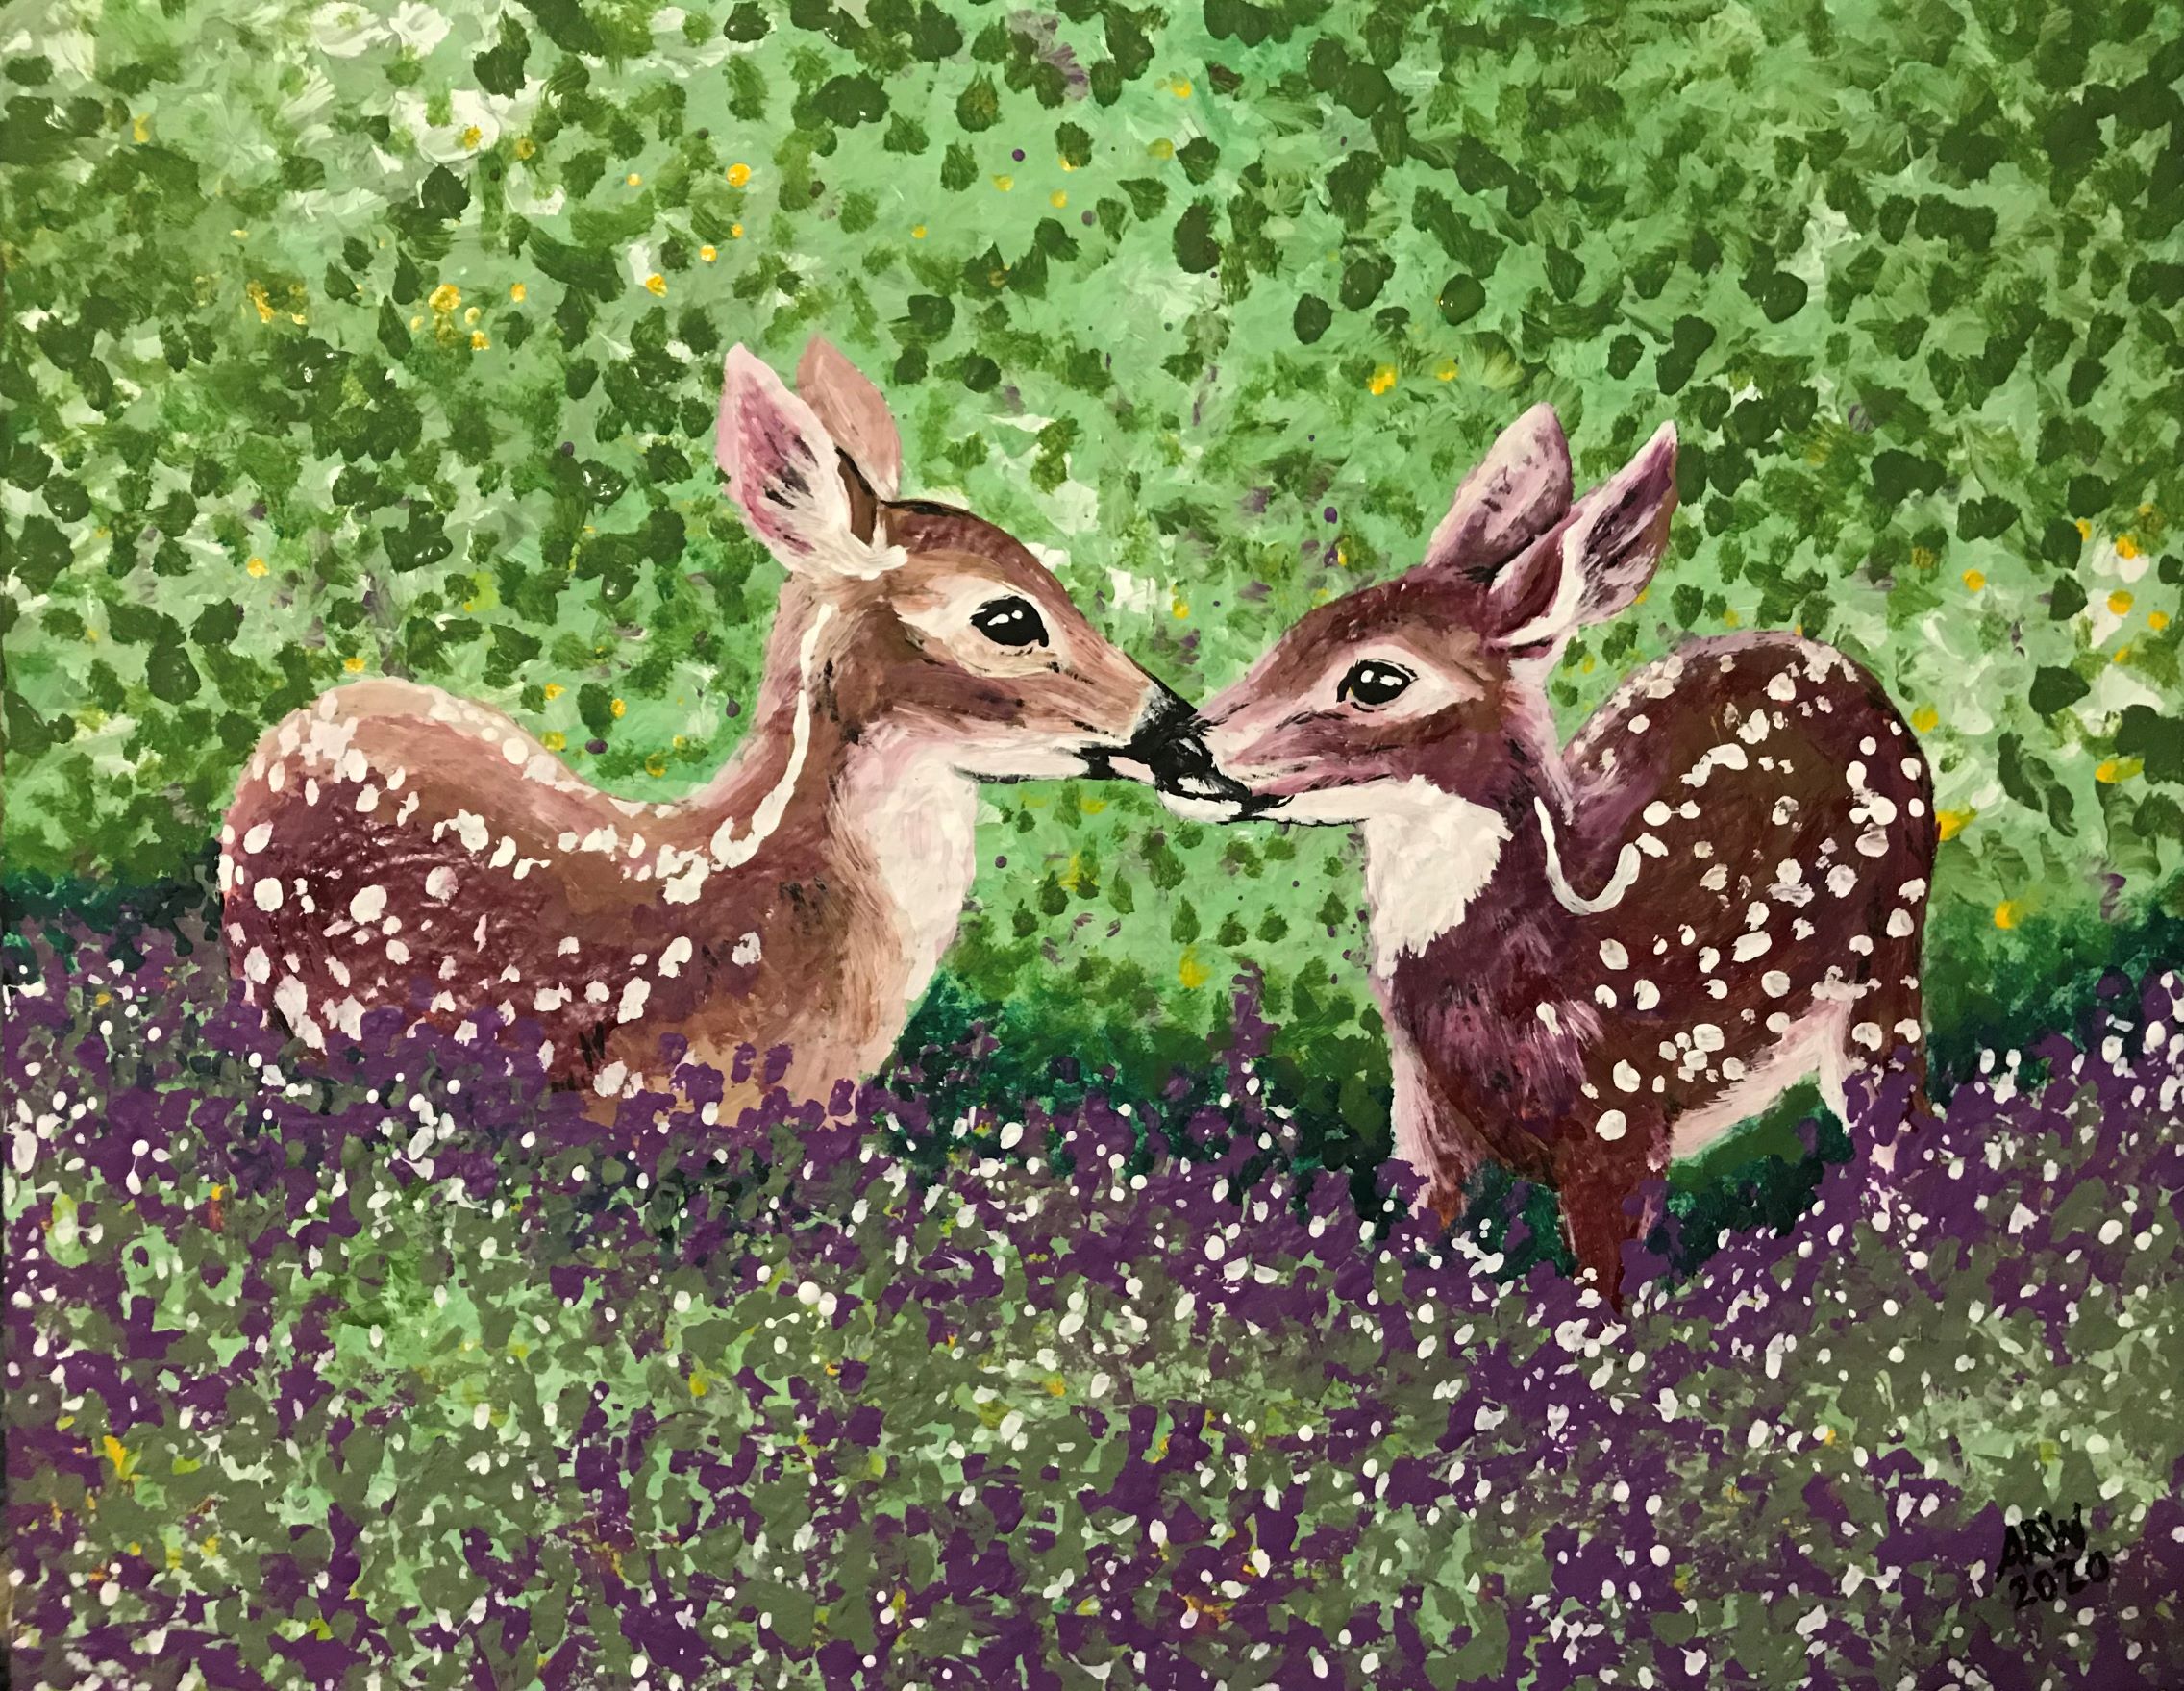 Fawns in the Flowers – Art with a Cause